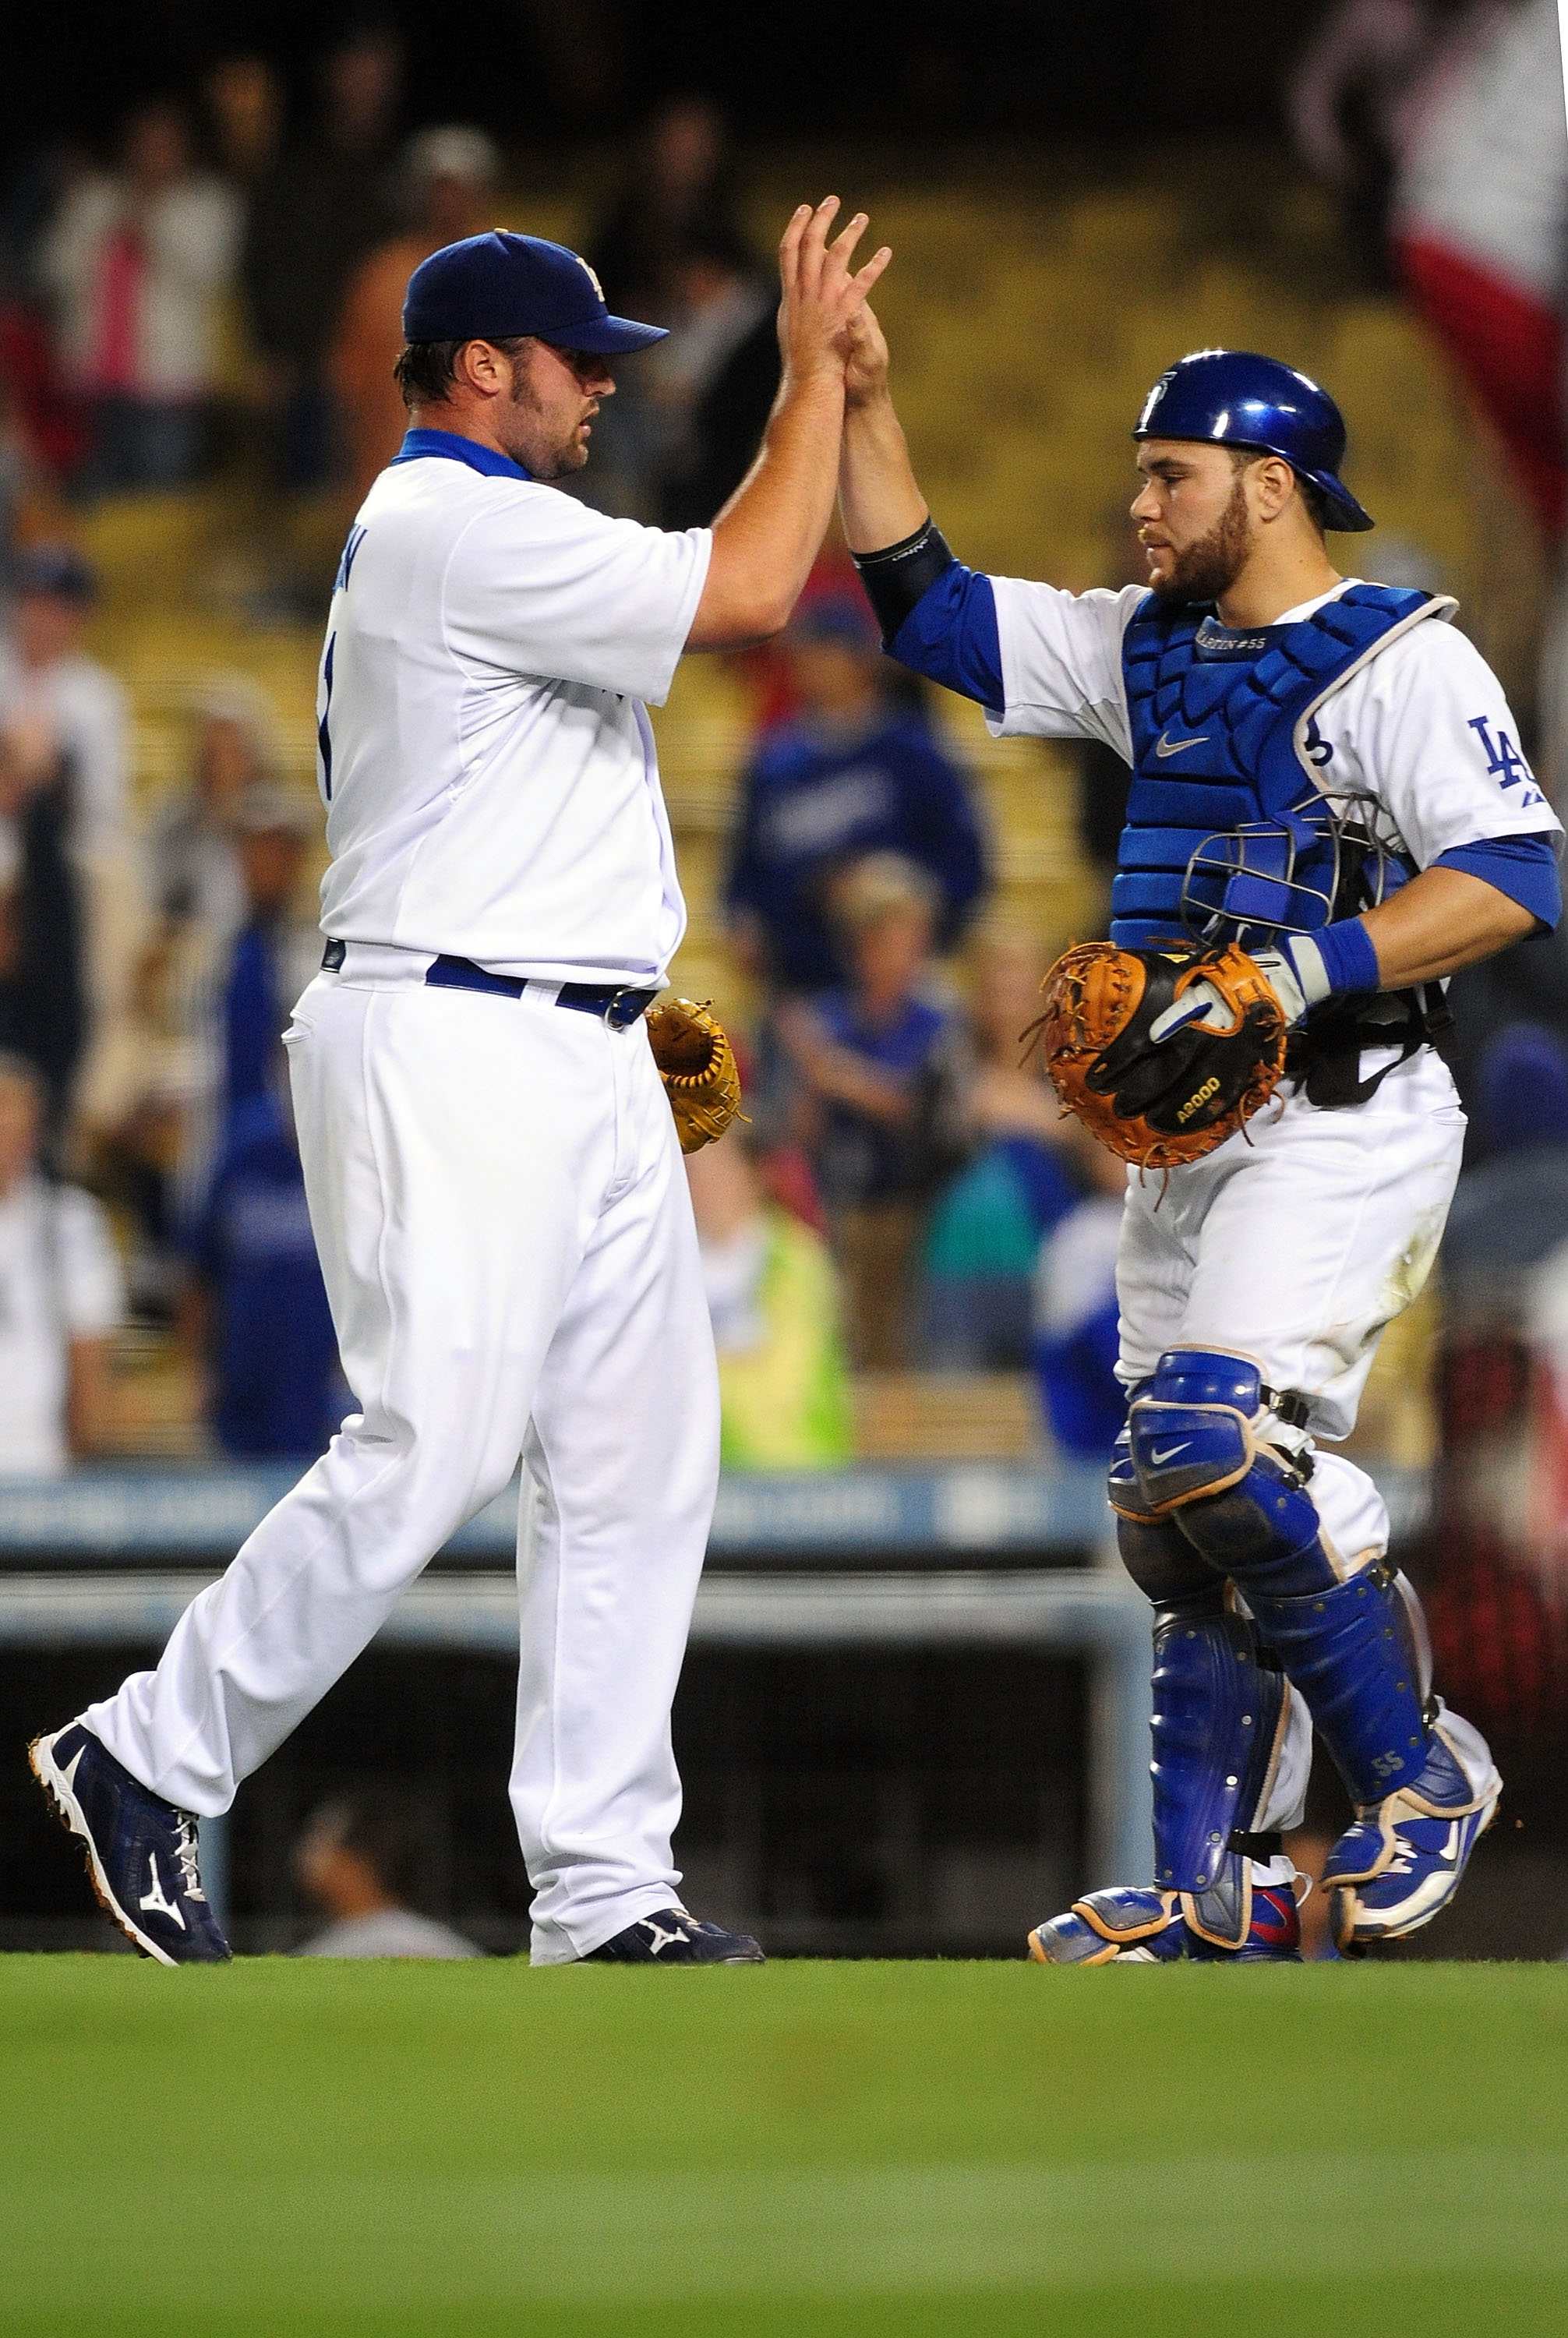 Dodgers place Russell Martin on 10-day injured list with back